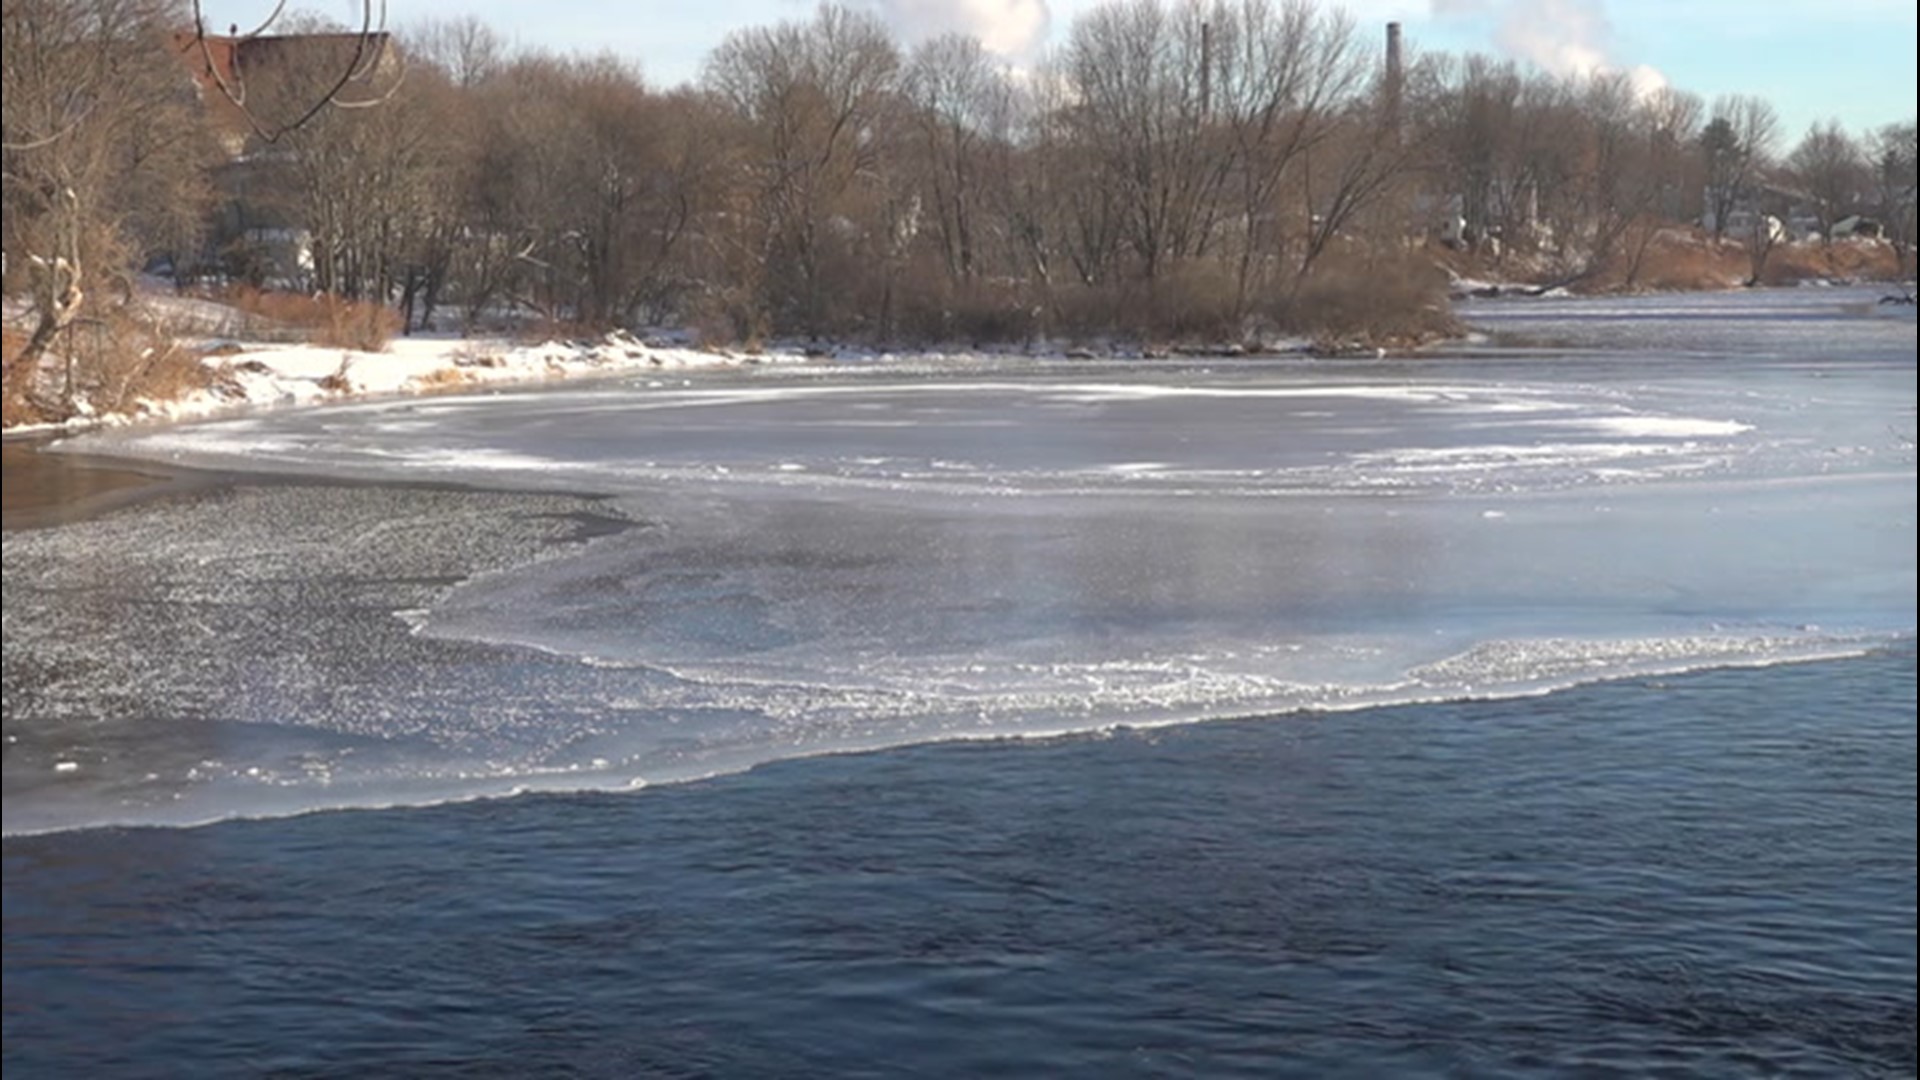 A perfectly round disc of ice that slowly rotated on the Presumpscot River in Westbrook, Maine, last January, and quickly became a viral media sensation, has made a brief reappearance.